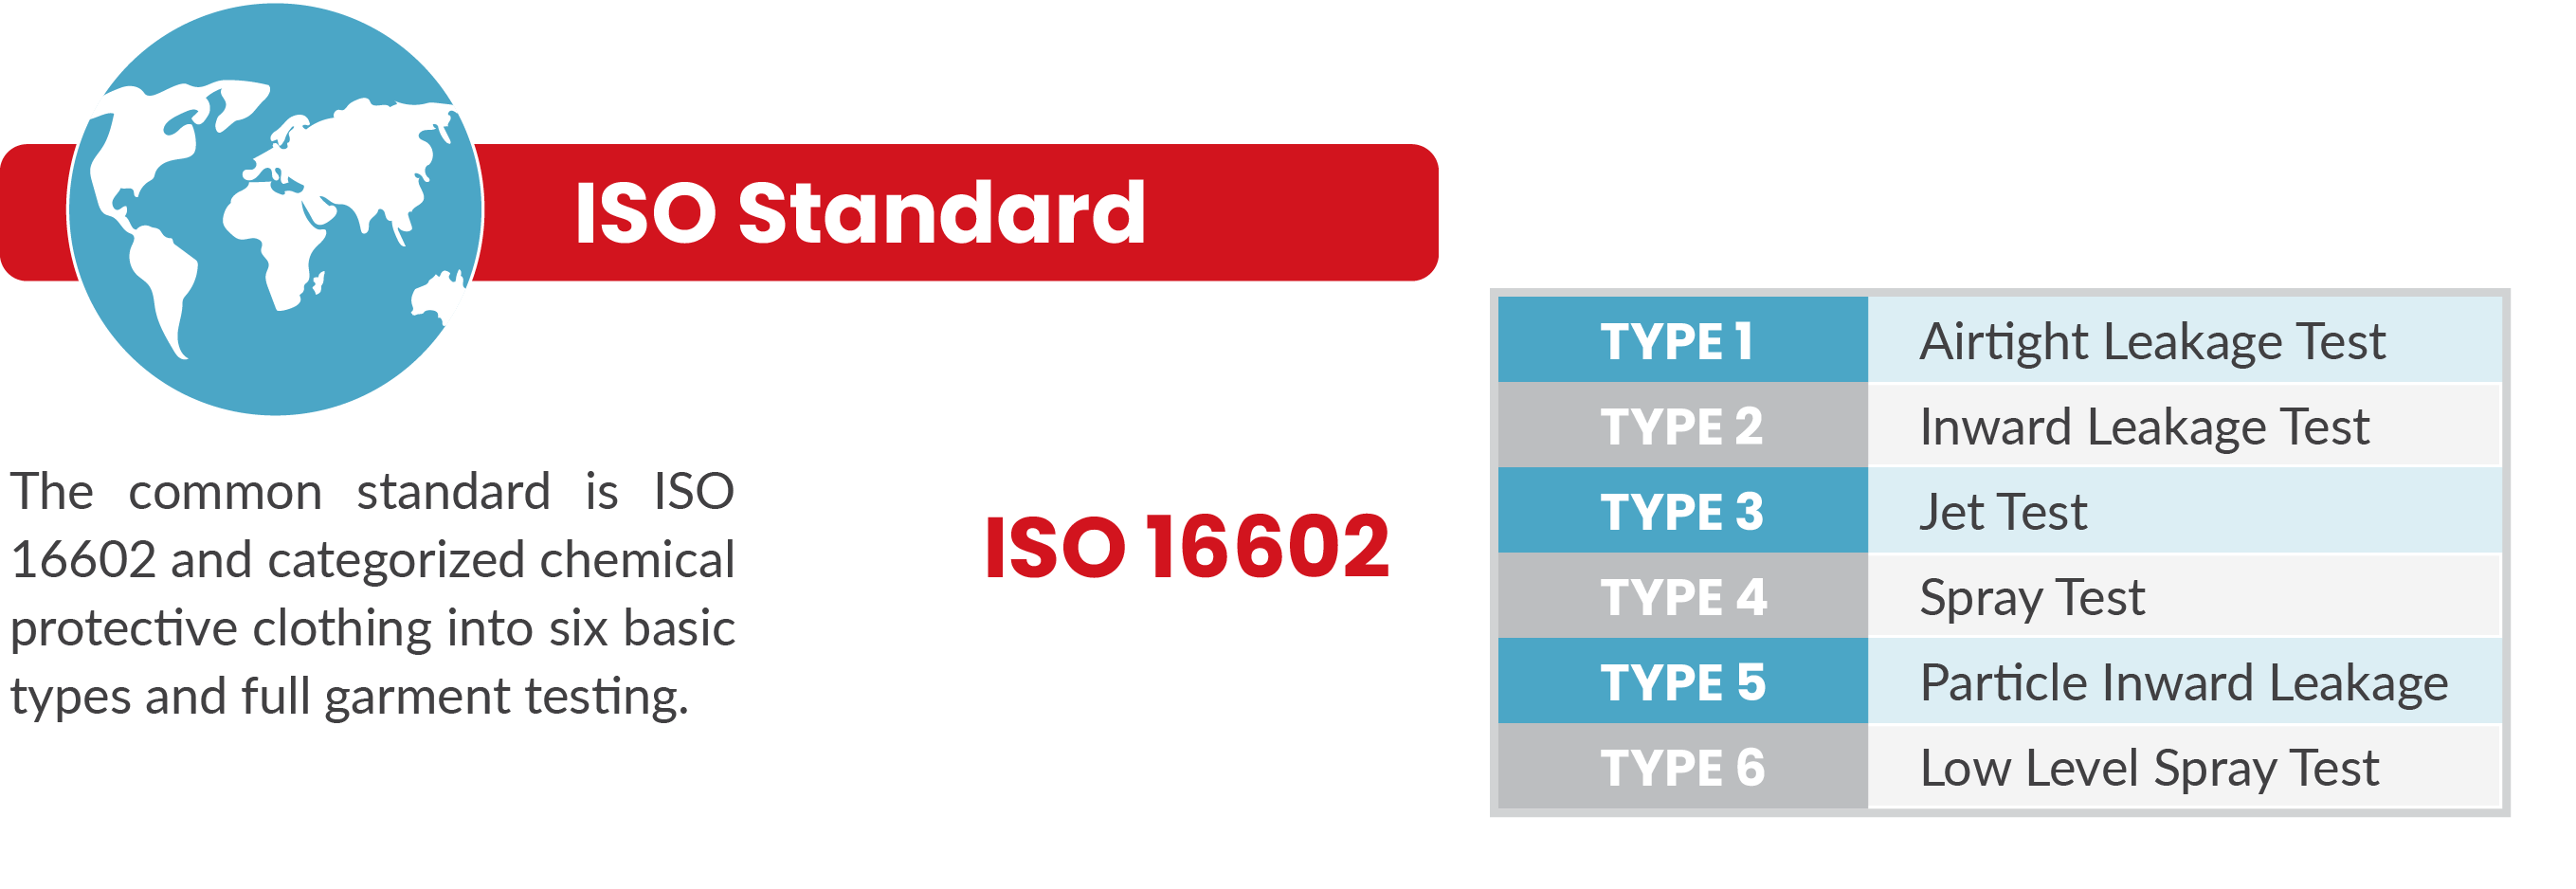 Coverall ISO Standards